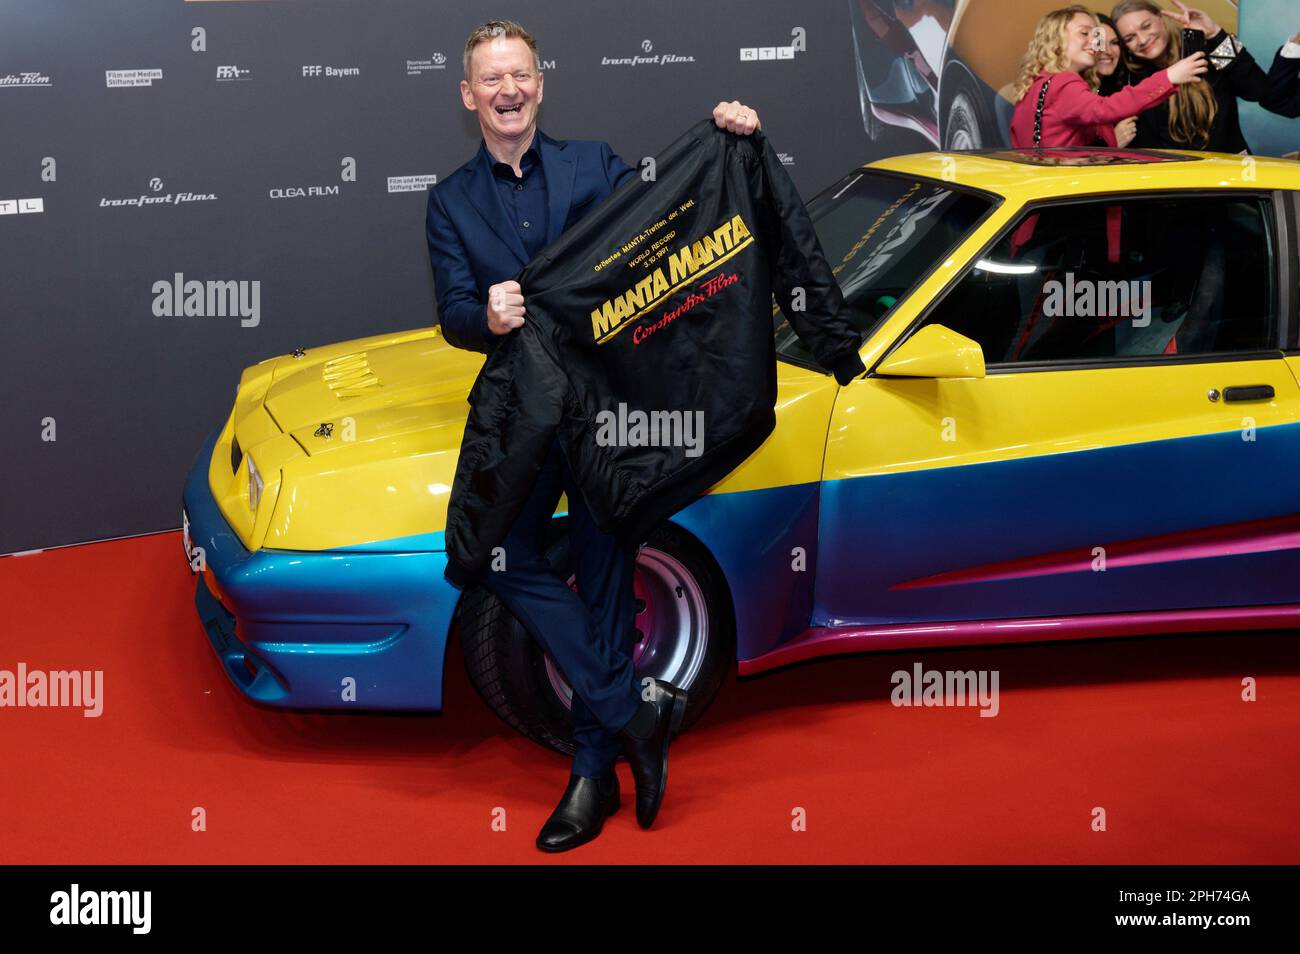 26 March 2023, North Rhine-Westphalia, Cologne: Actor Michael Kessler comes  to the premiere of the film "Manta Manta - Zwoter Teil". Photo: Henning  Kaiser/dpa Stock Photo - Alamy